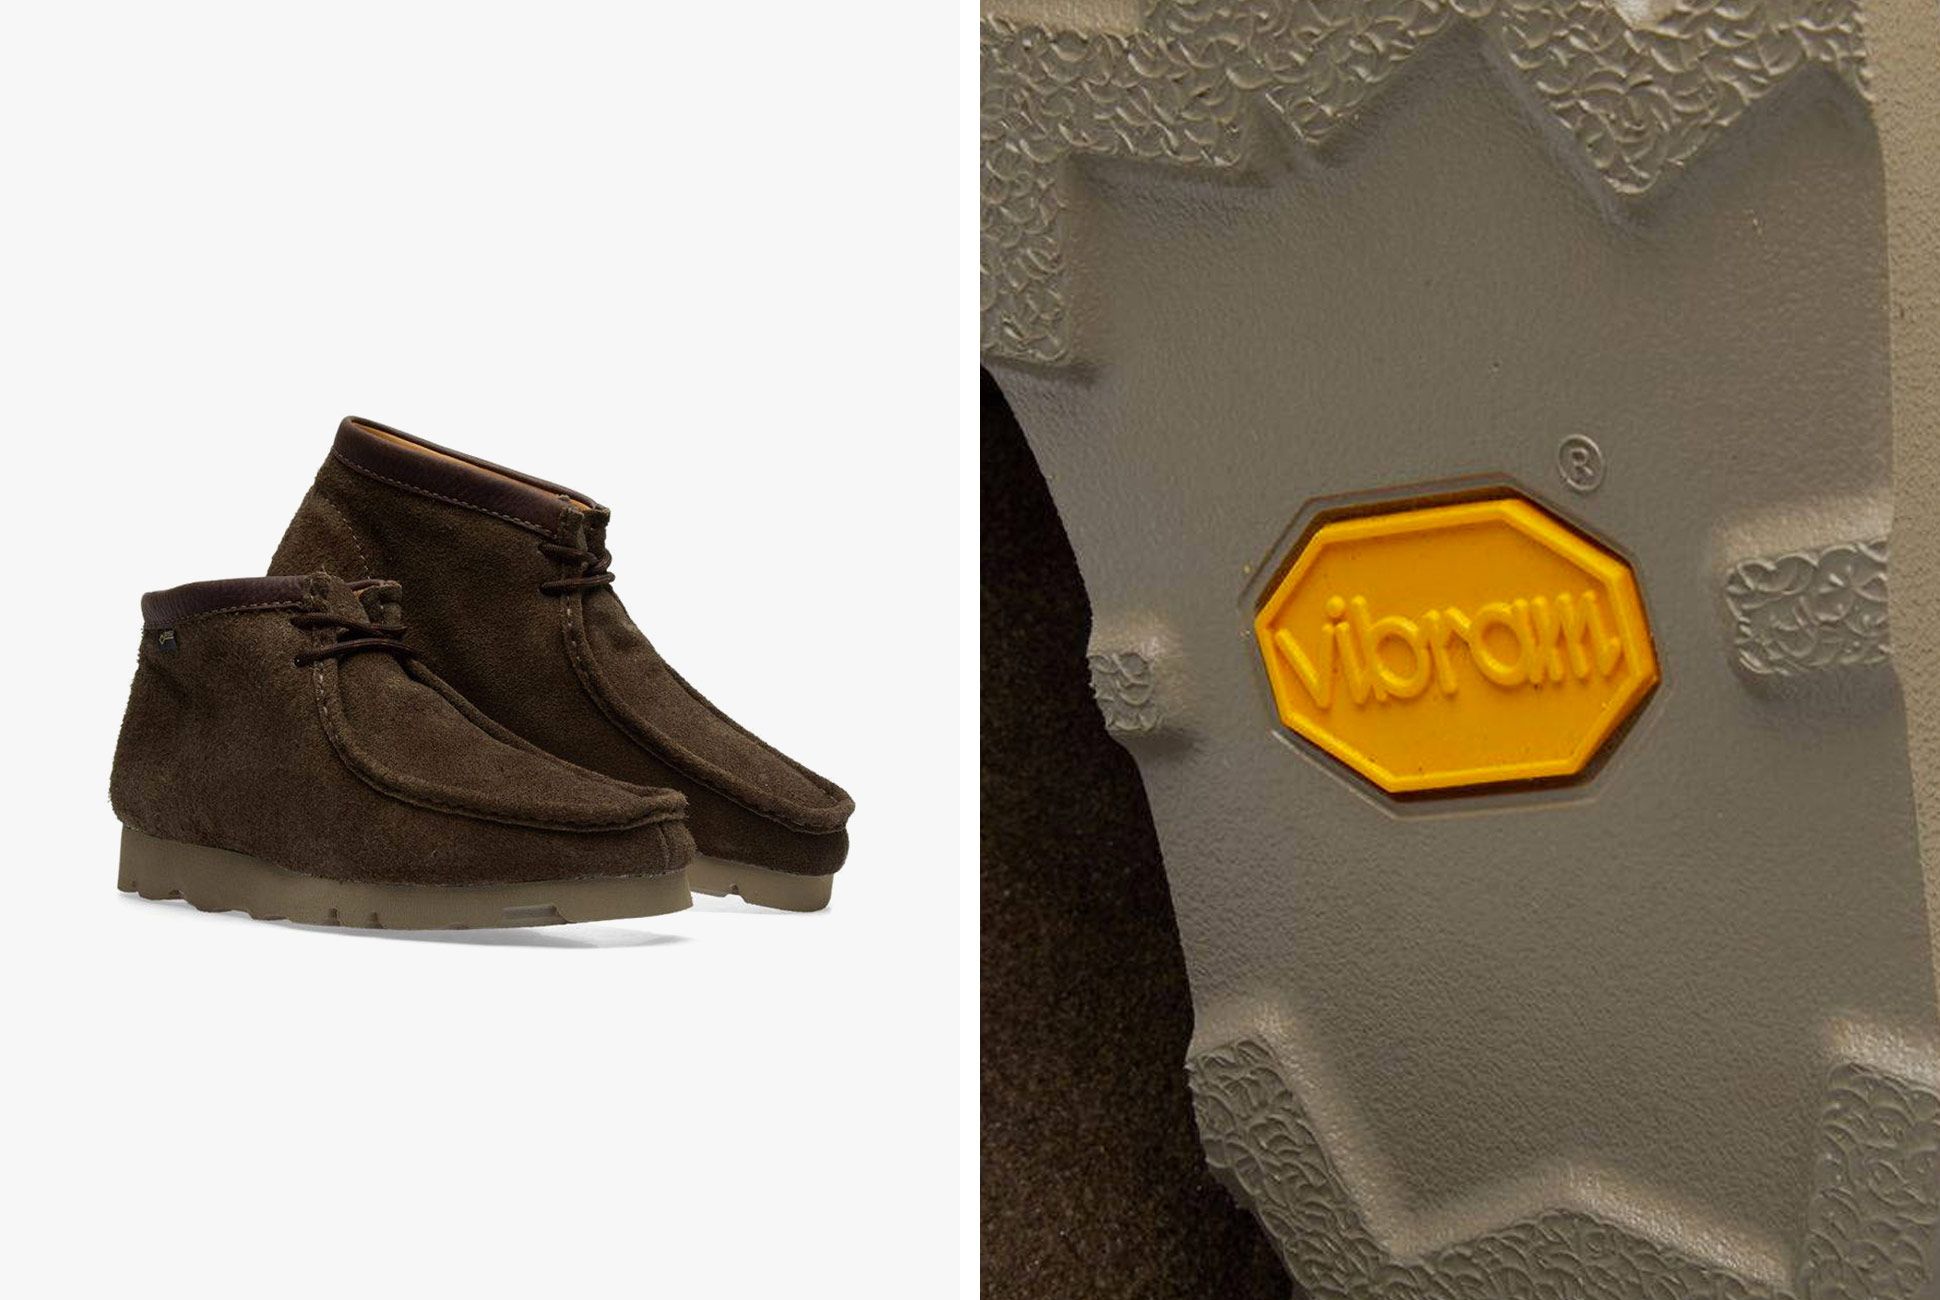 The Clarks Wallabee GTX Boot is Made for the Elements - Gear Patrol